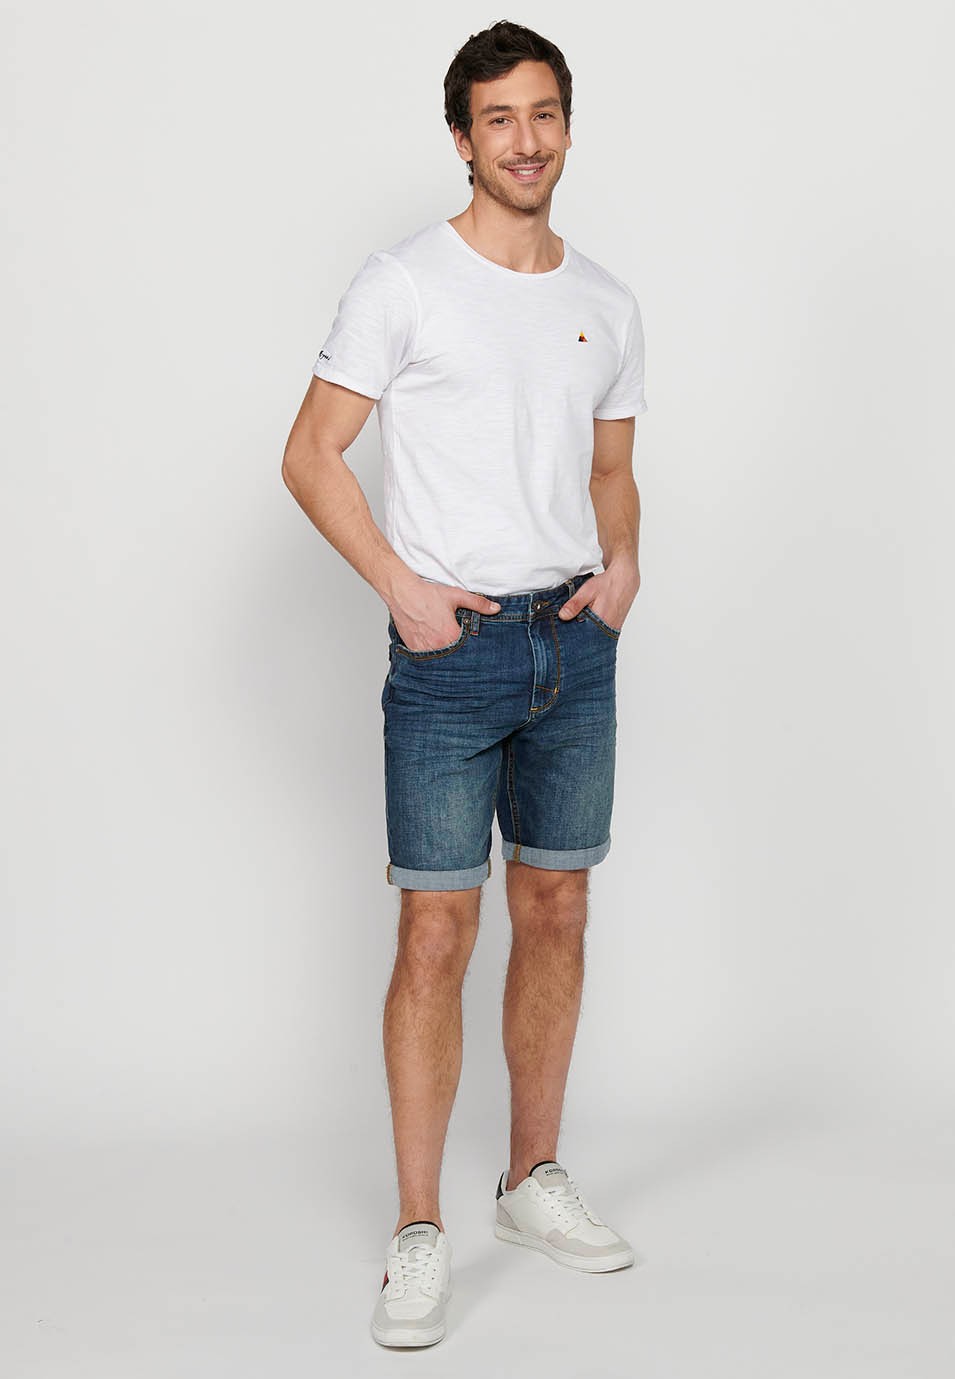 Bermuda denim shorts with front zipper and button closure with five pockets, one blue pocket pocket for Men 1